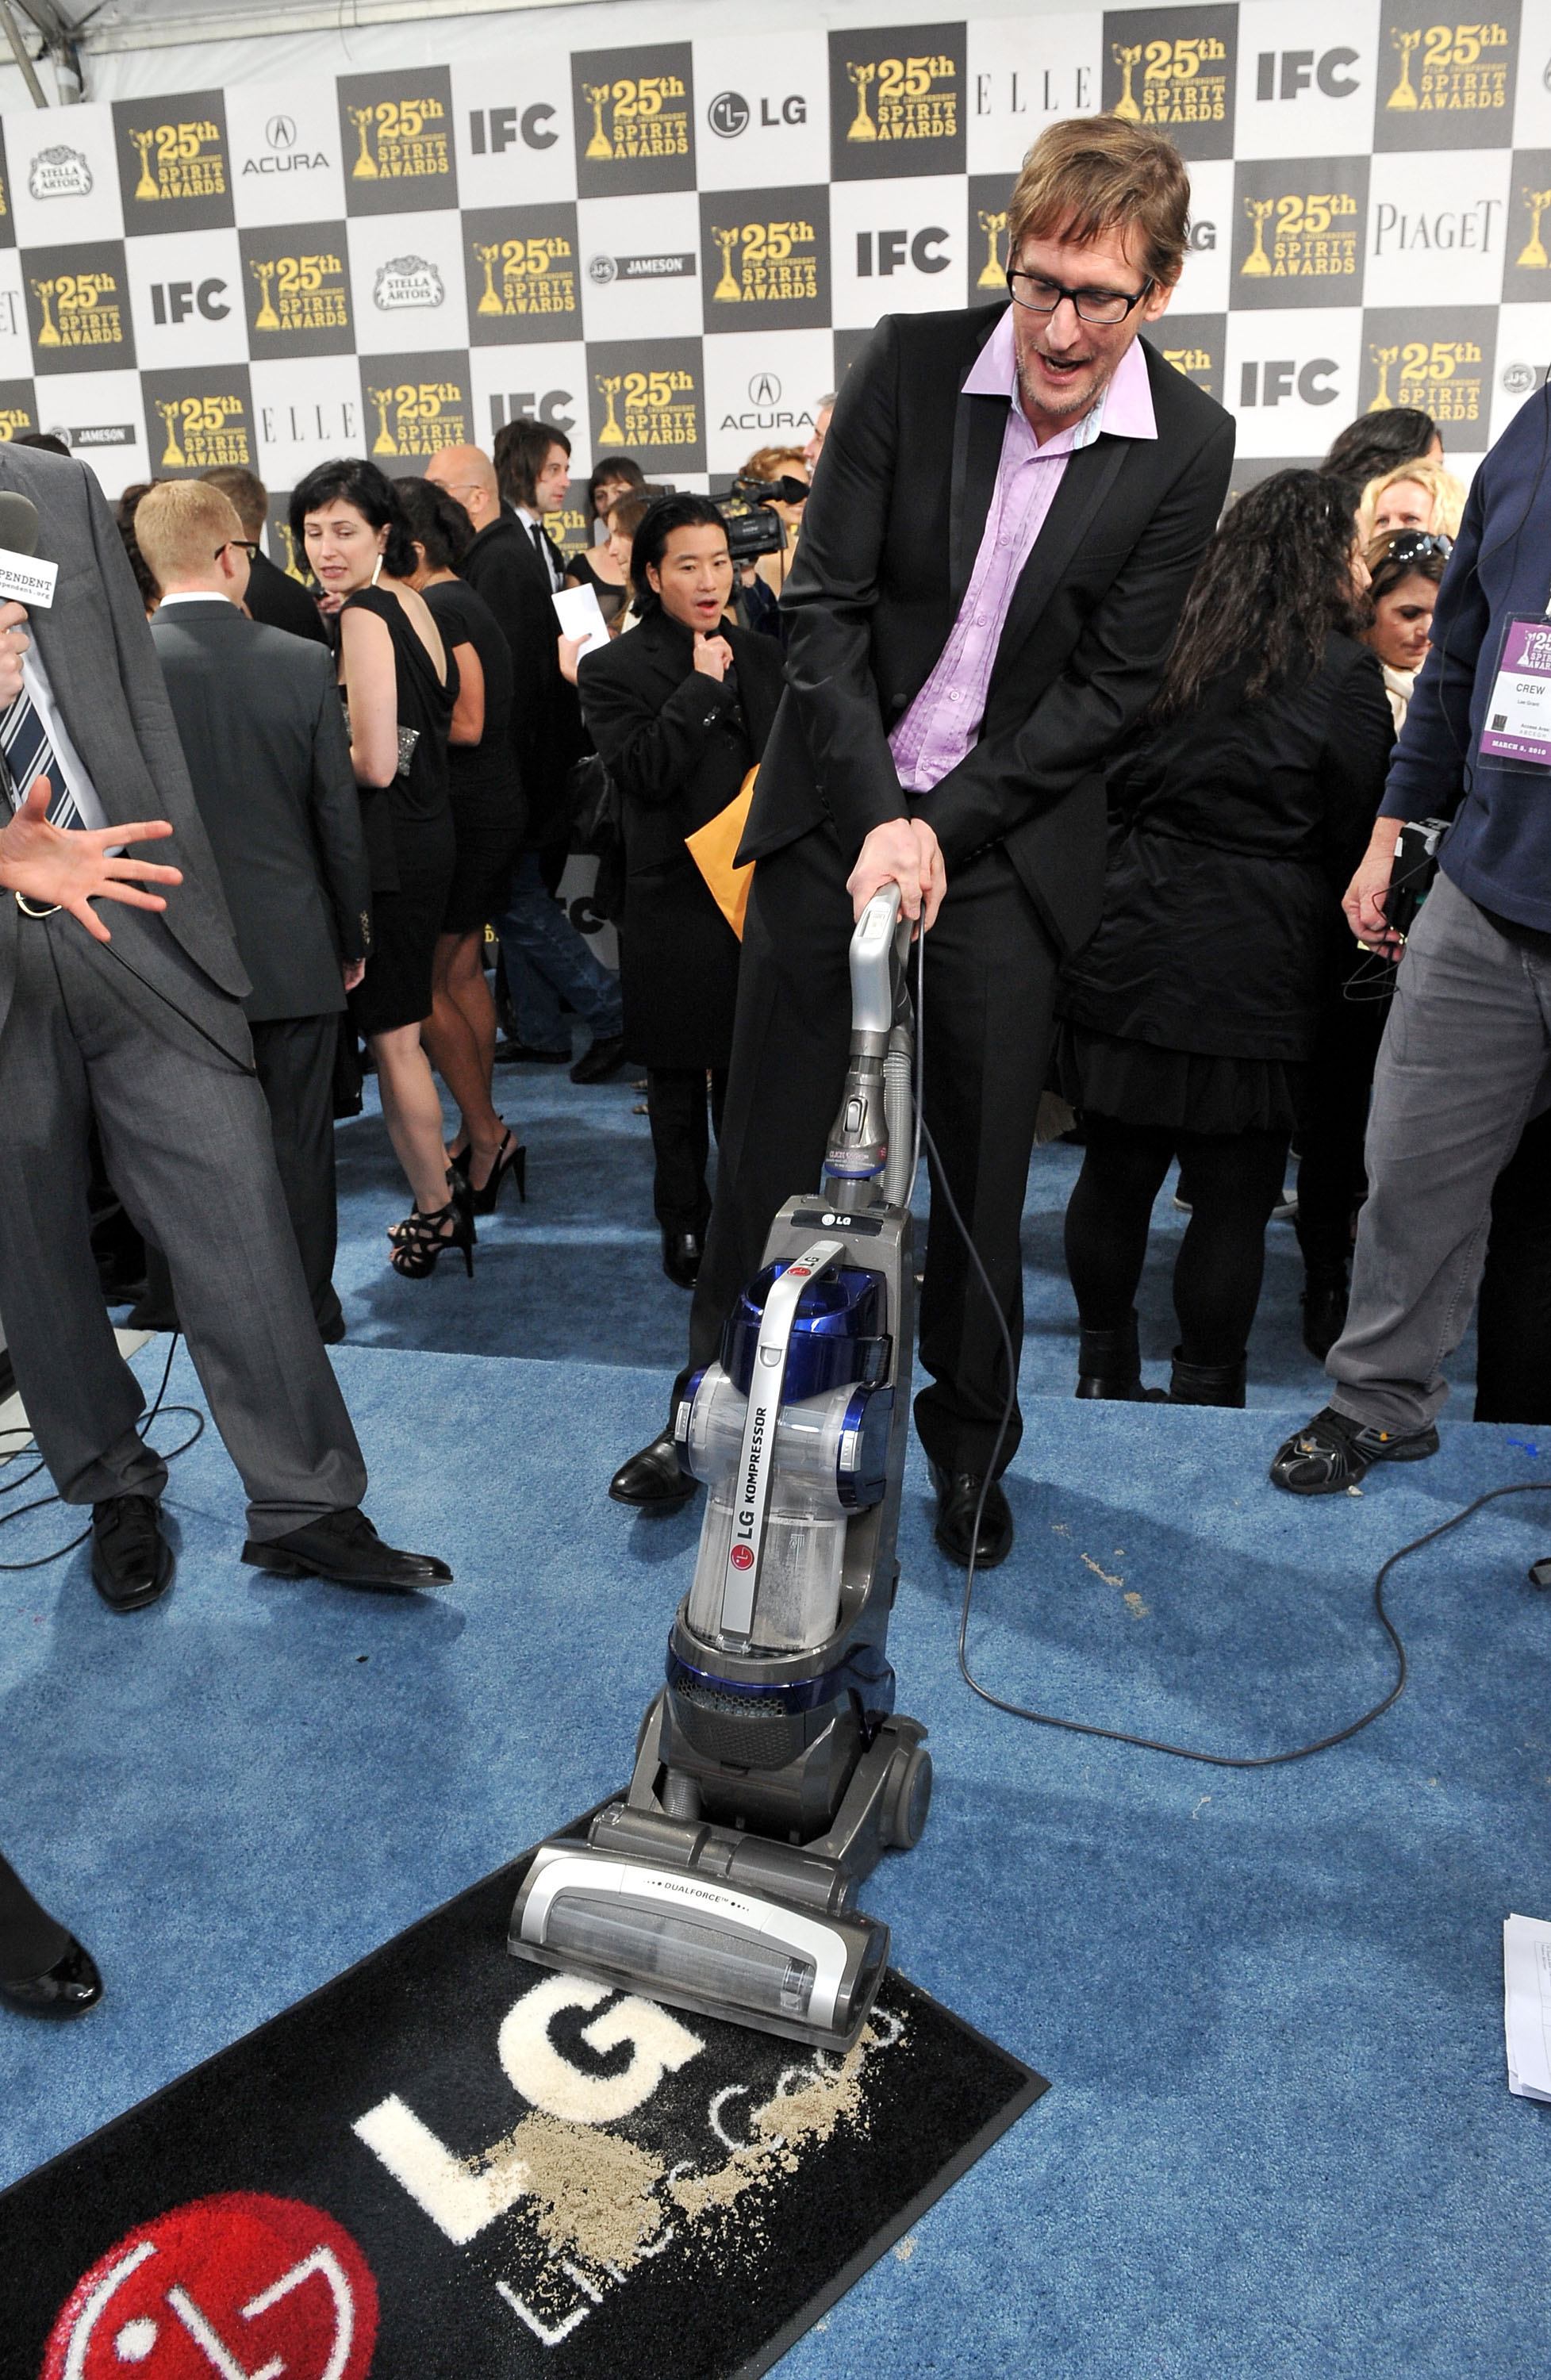 Ray McKinnon with the LG Electronics Kompressor Vacuum on 25th Spirit Awards Blue Carpet held at Nokia Theatre L.A. Live on March 5, 2010 in LA